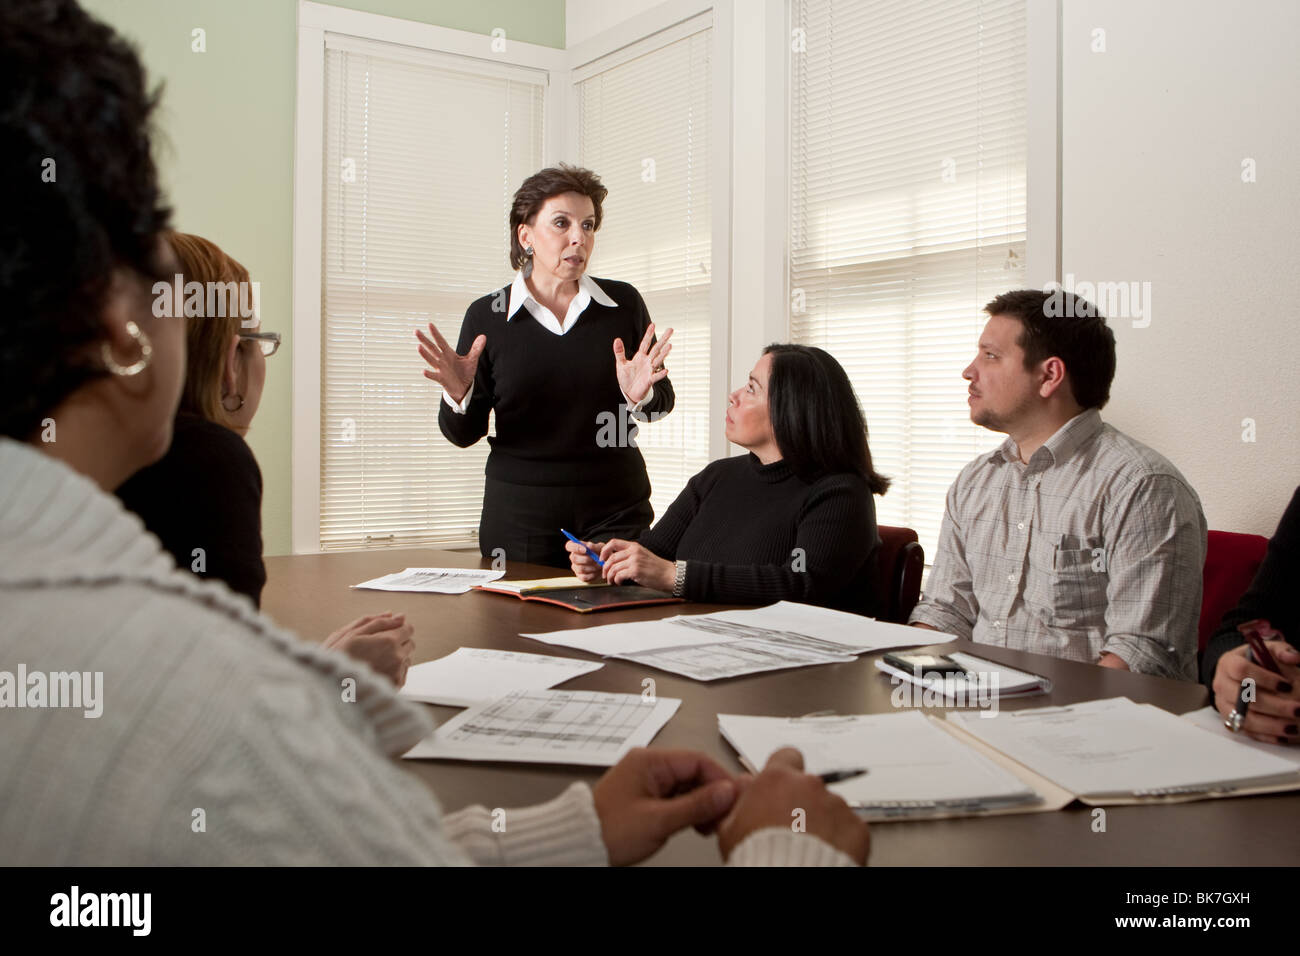 Female director of non-profit agency in San Antonio, Texas, conducts a staff meeting in the office conference room. Stock Photo